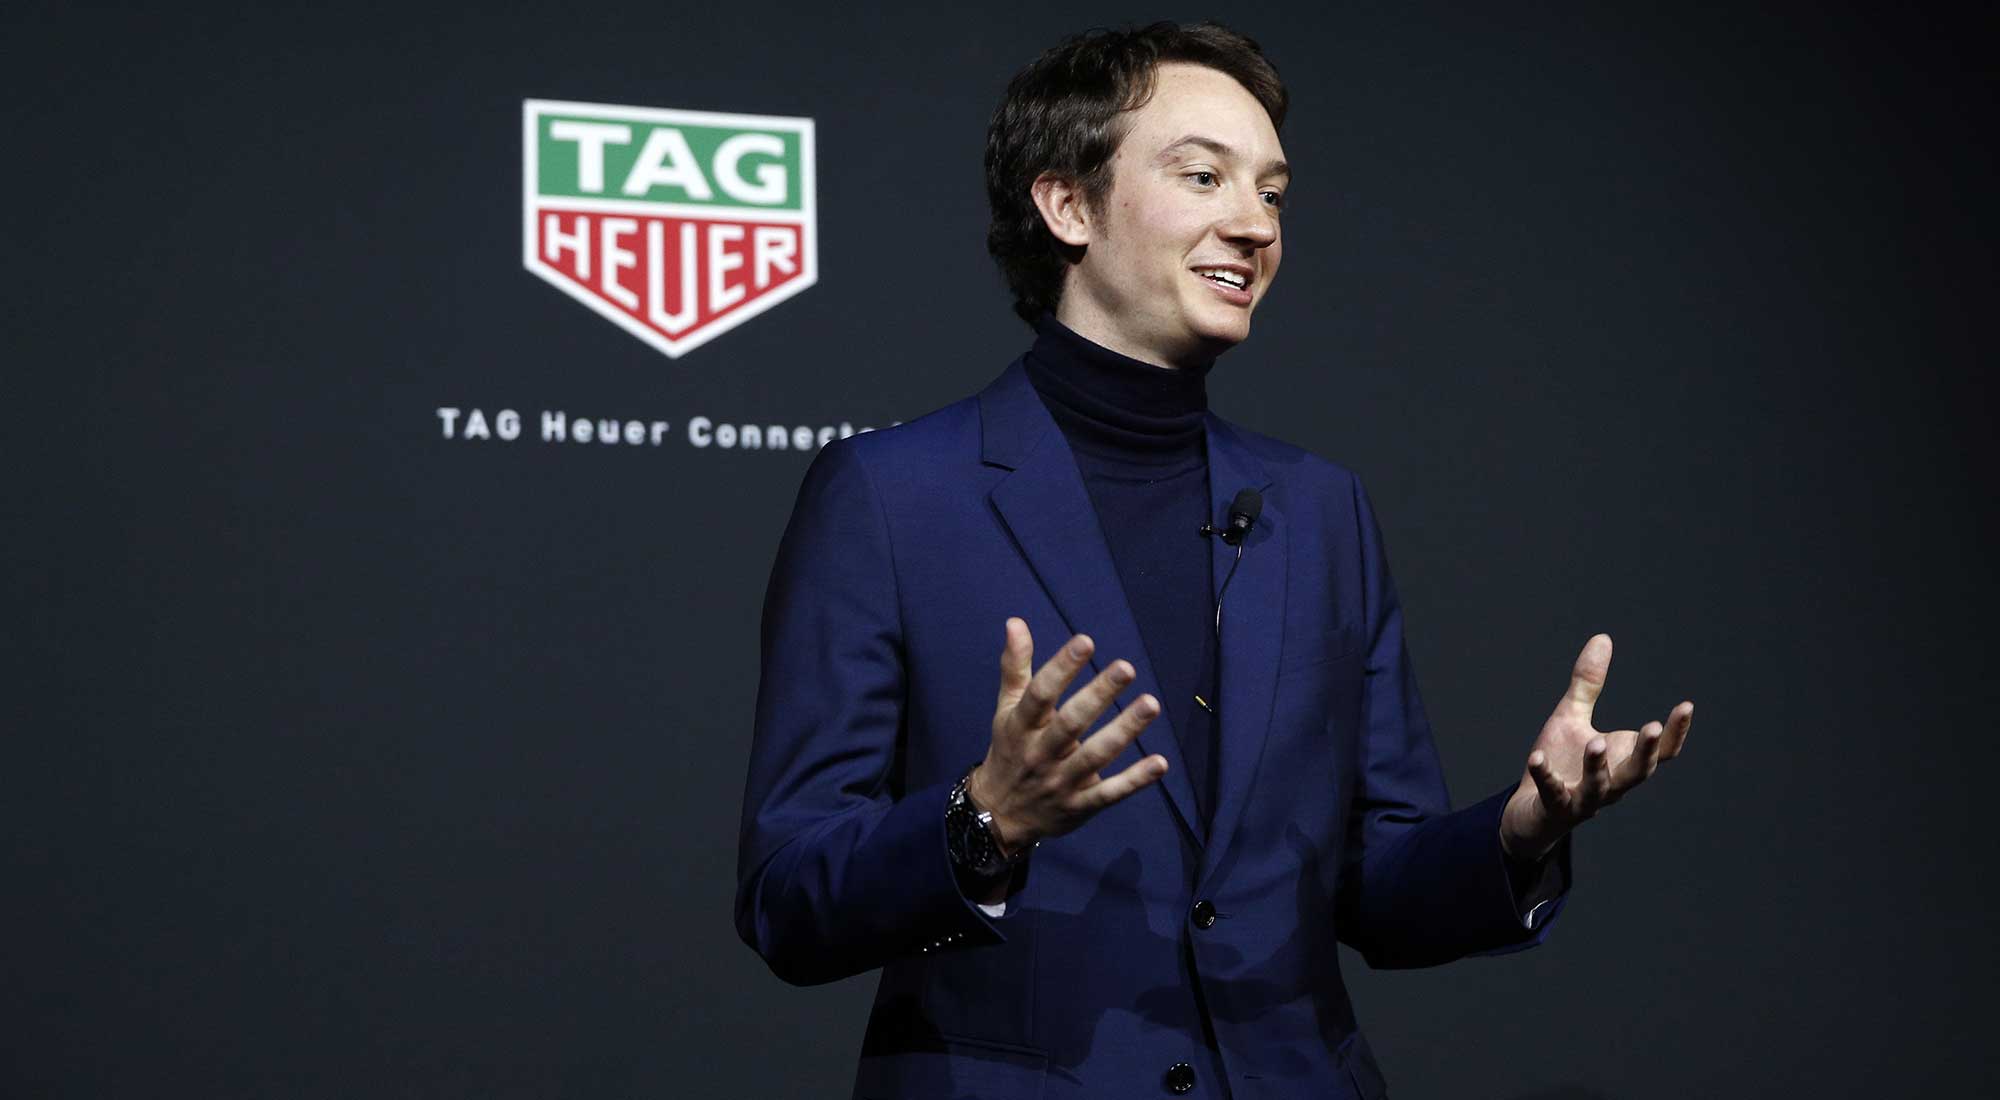 TAG Heuer launches third generation luxury connected watch in New York -  LVMH